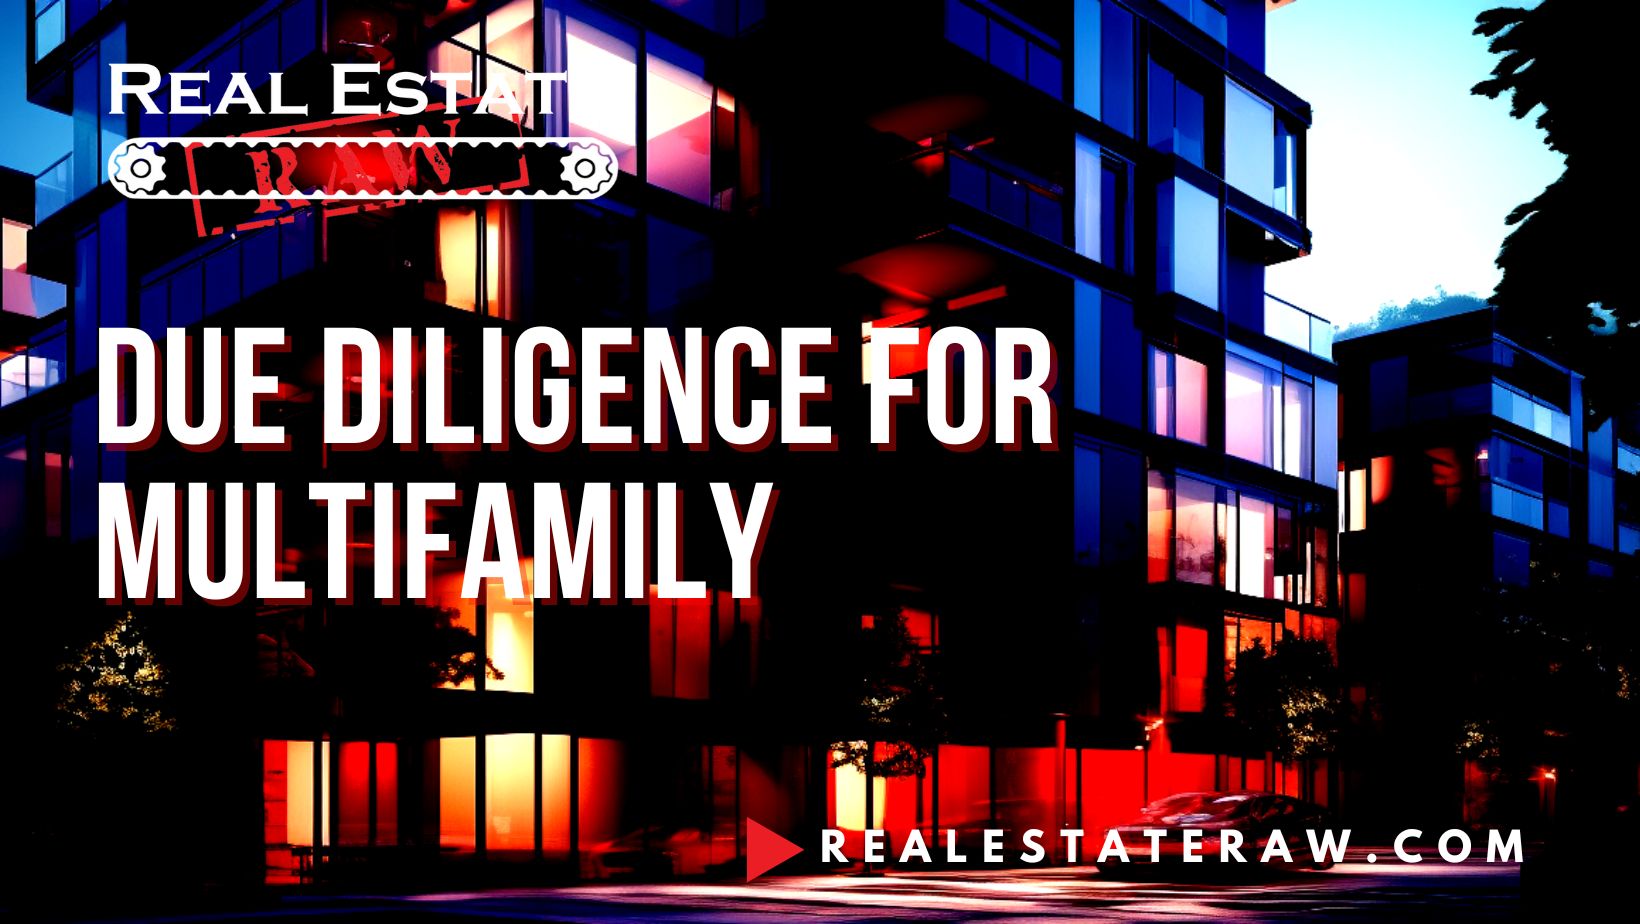 Due Diligence for Multifamily